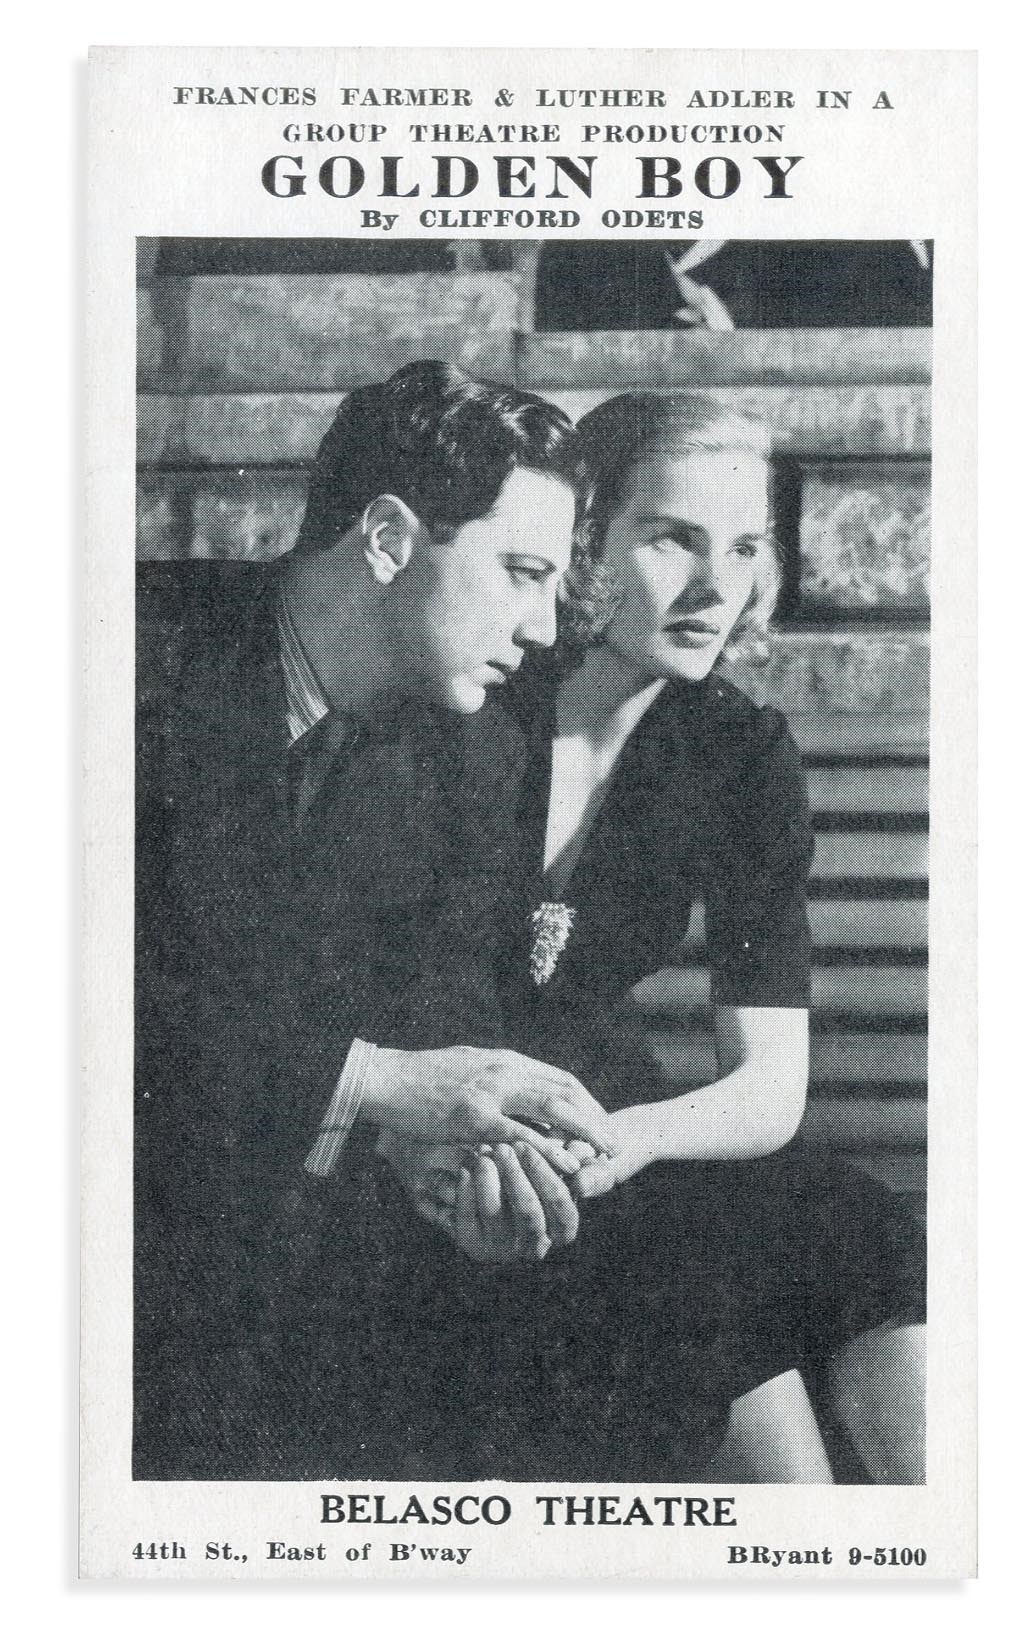 The New Yorker Collection - 1937 Francis Farmer in "Golden Boy" by Clifford Odets Postcard